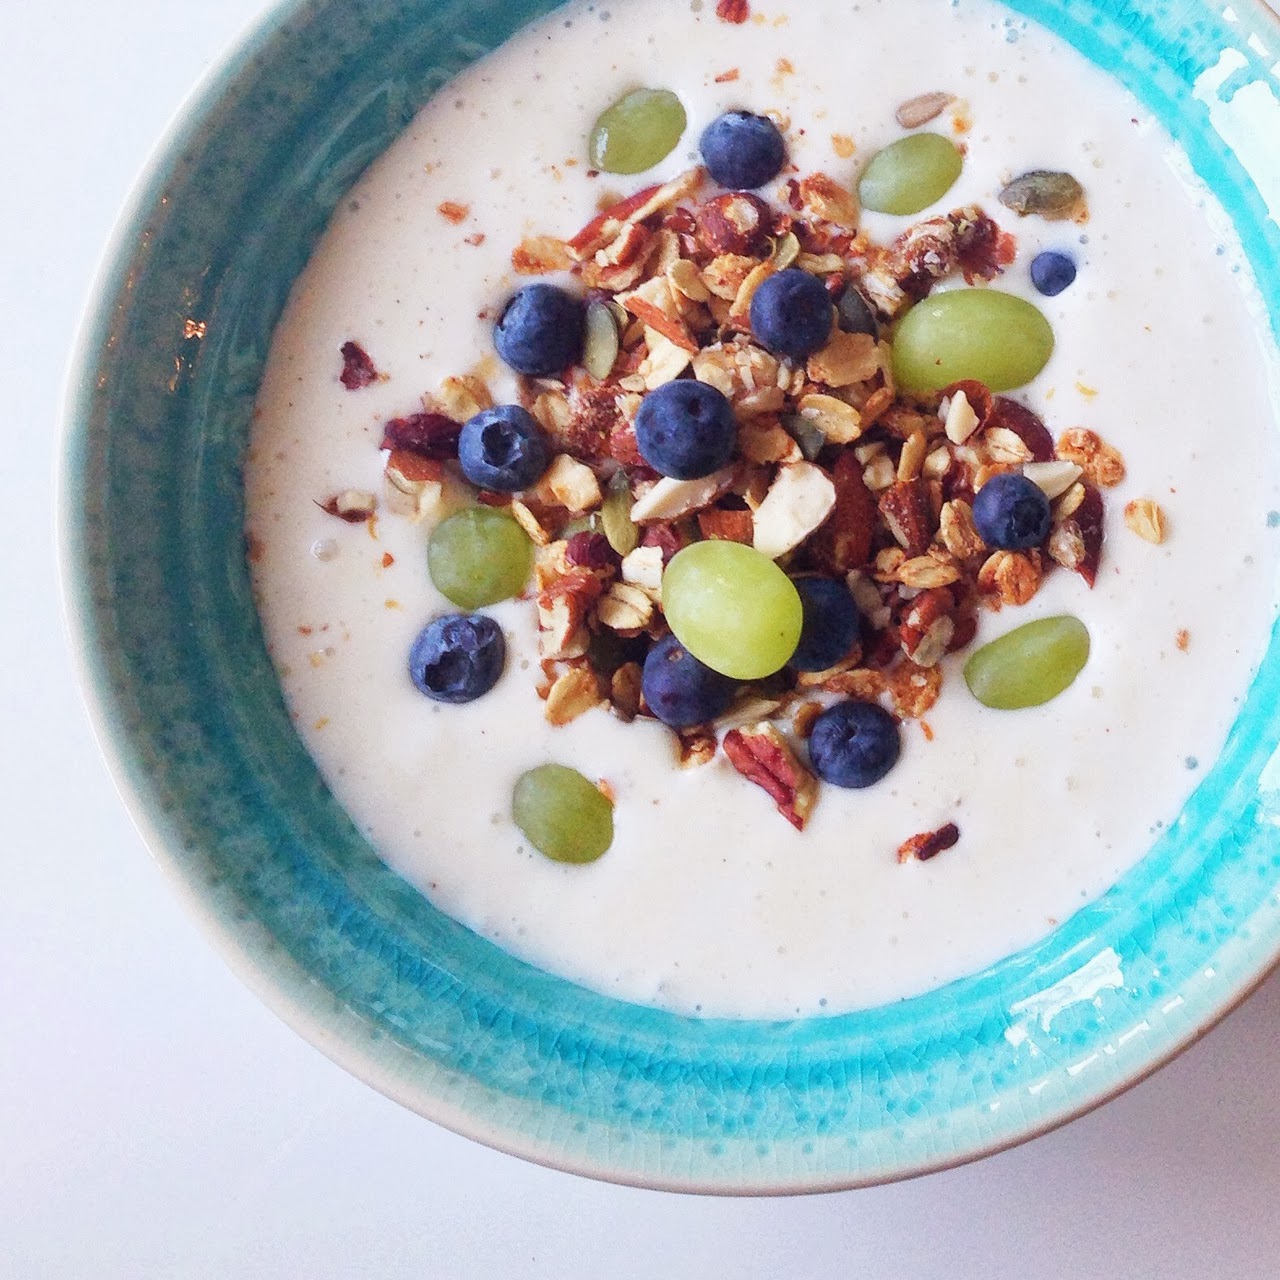 Healthy Living in Heels: Blissful Banana-Quark Smoothie Bowl